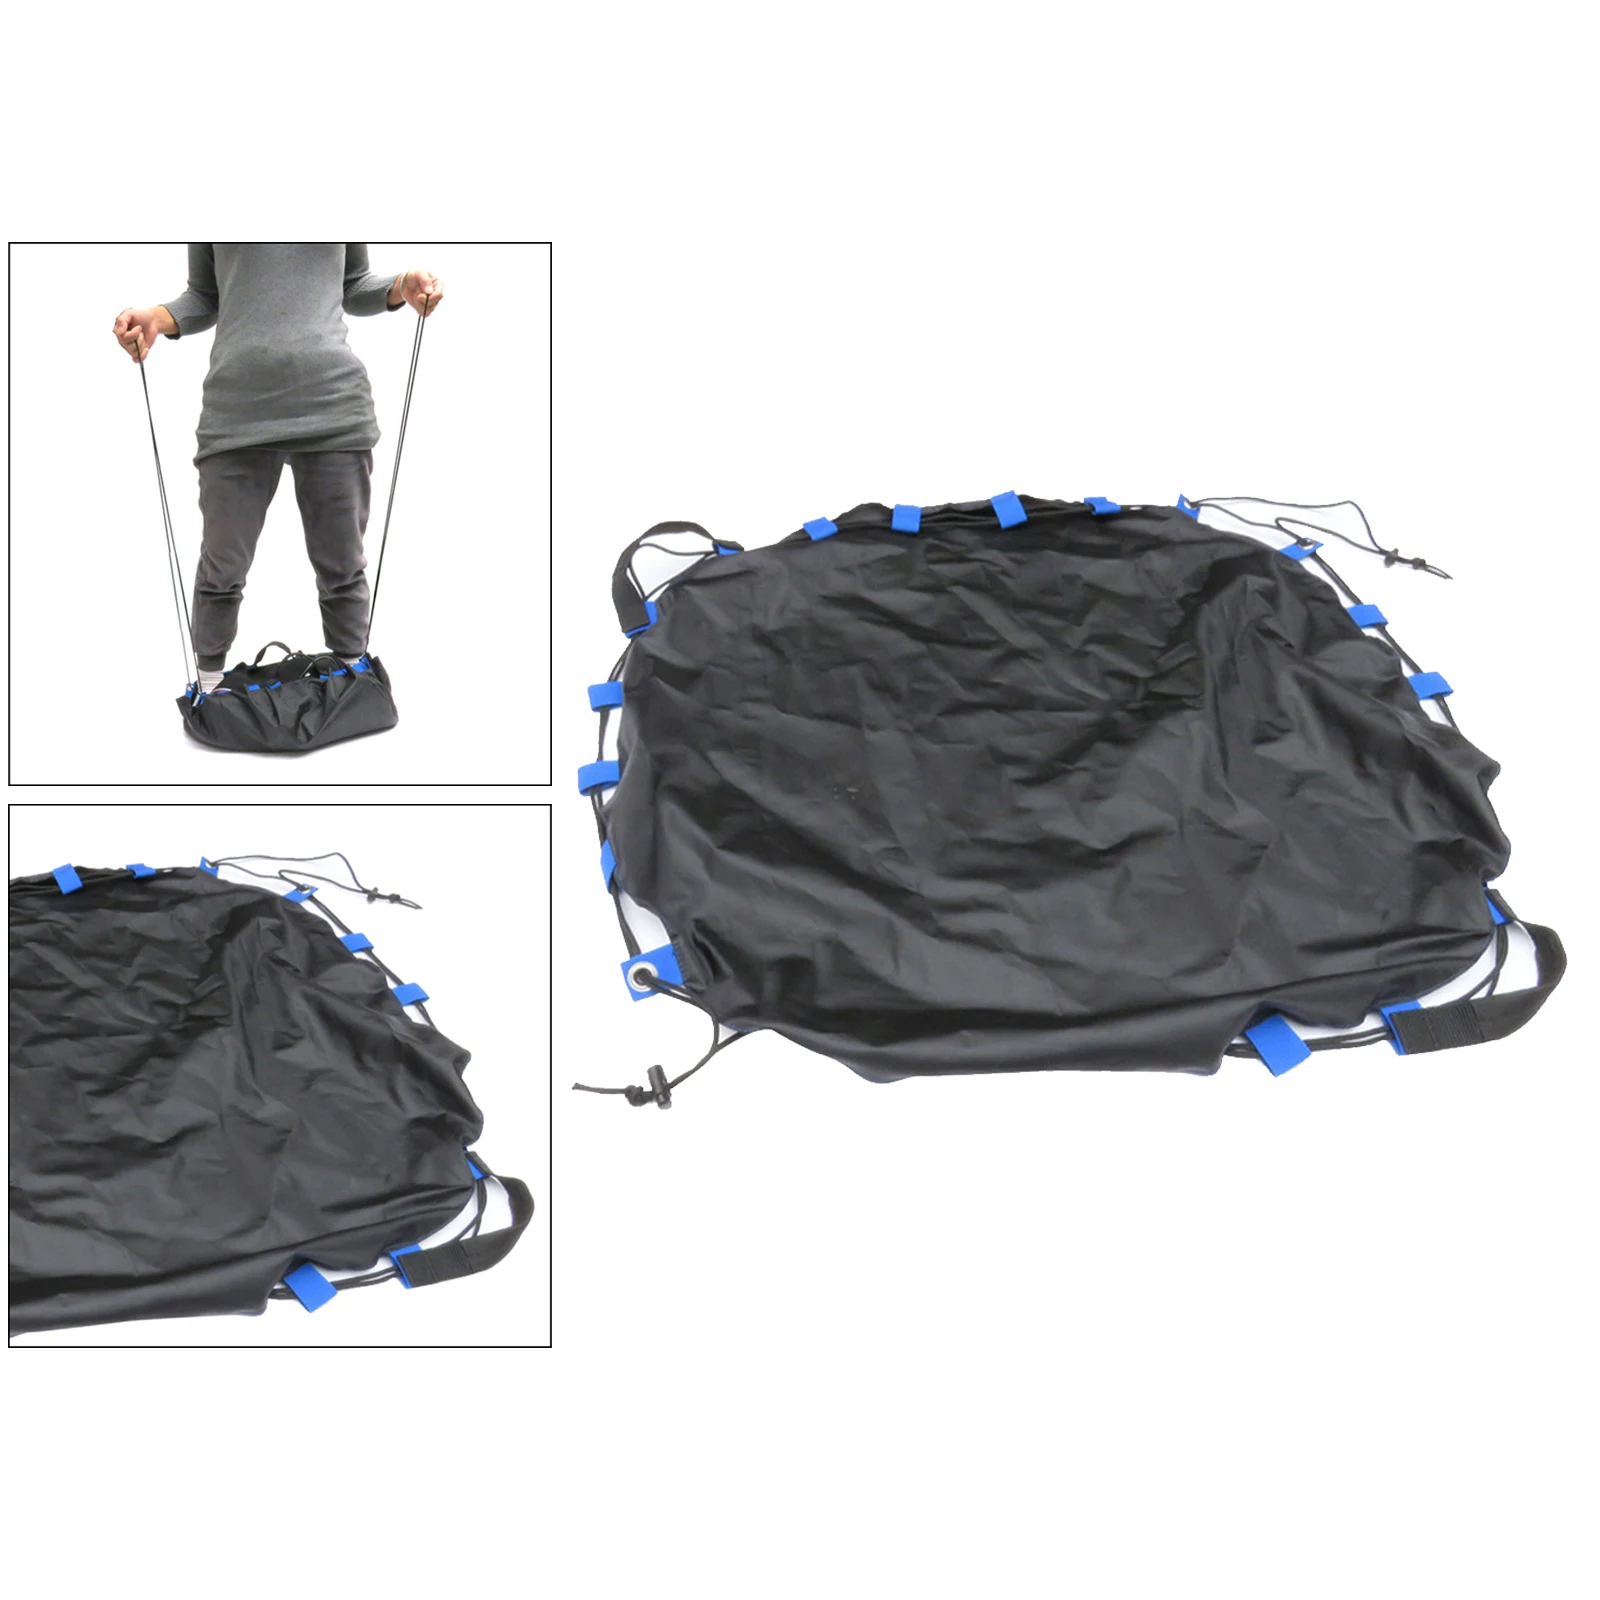 Portable Surf Changing Mat, Waterproof Wetsuit Change Mat Dry Bag for Surfing, Swimming, Scuba Diving, Water Sports